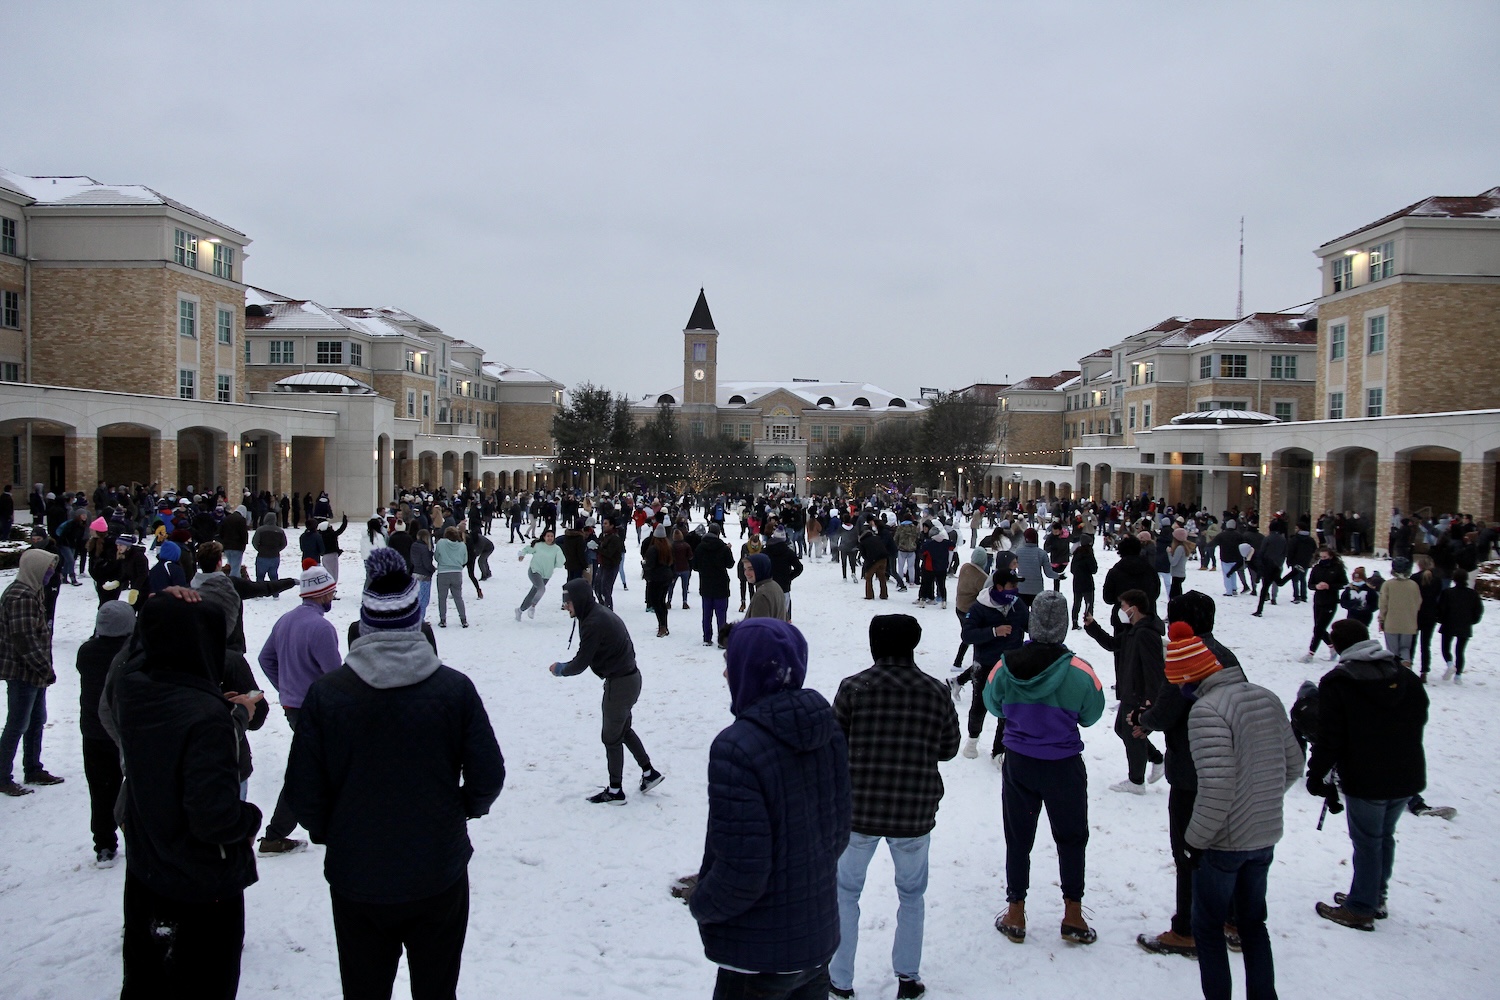 Campus-wide snowball fight